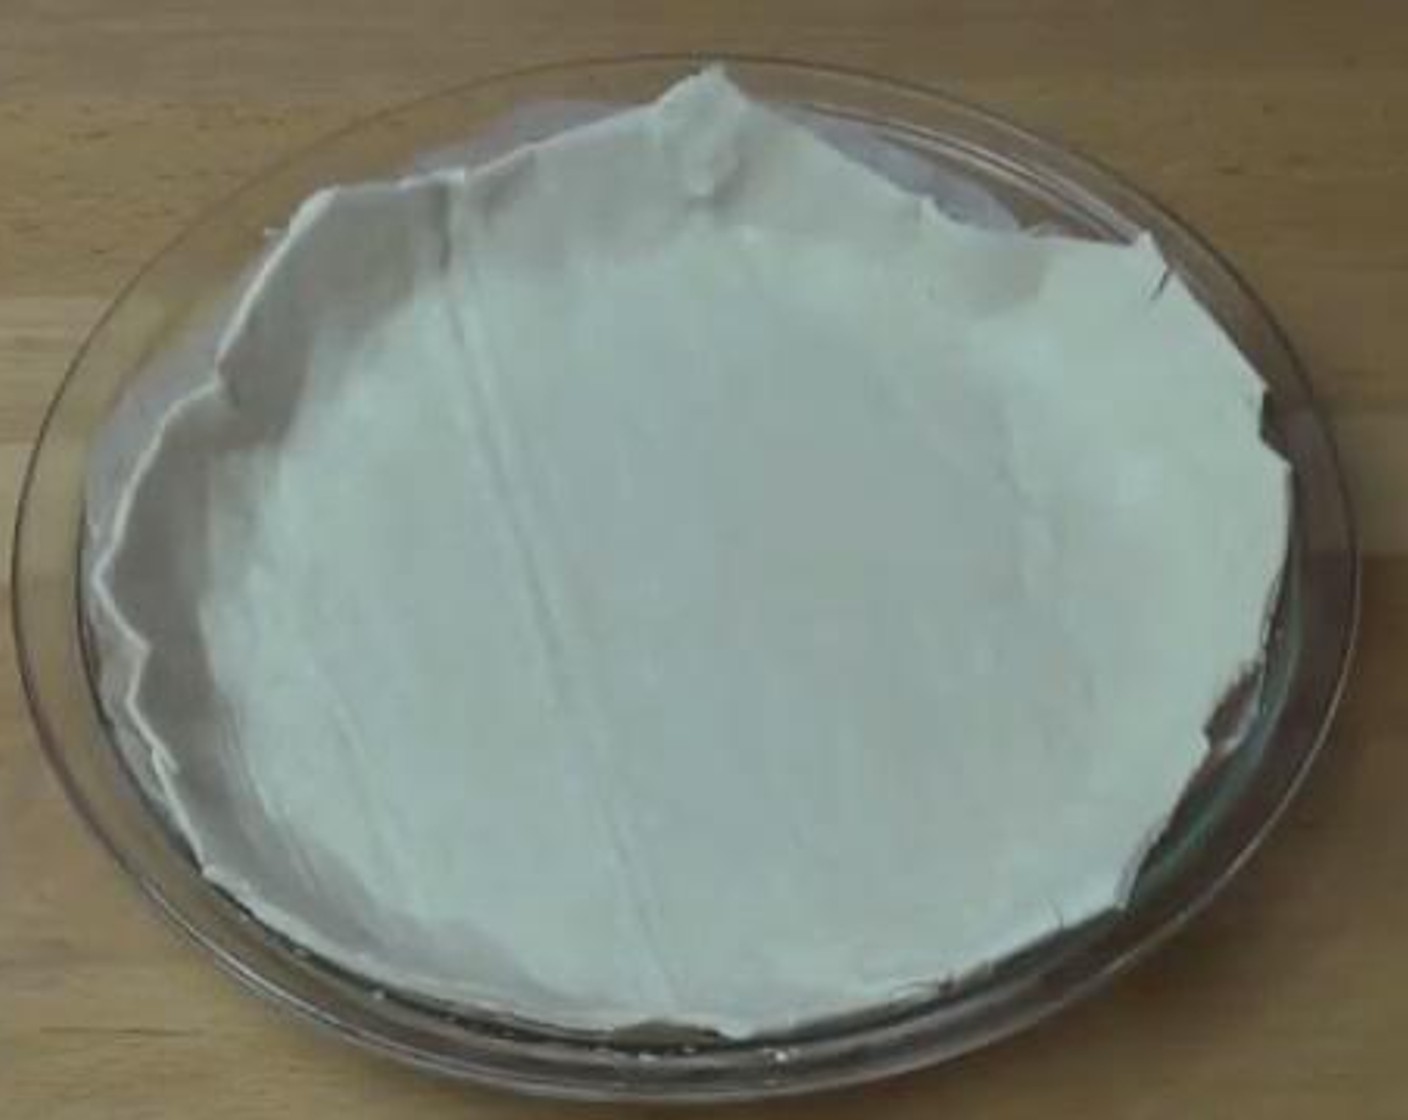 step 2 Sprinkle the Nonstick Cooking Spray (as needed) over a pie dish. Line the dish with nonsticky baling paper. Gently press Puff Pastry (1) into the dish. Cut the edges which are outside of the dish and set them aside while you are working on the filling.